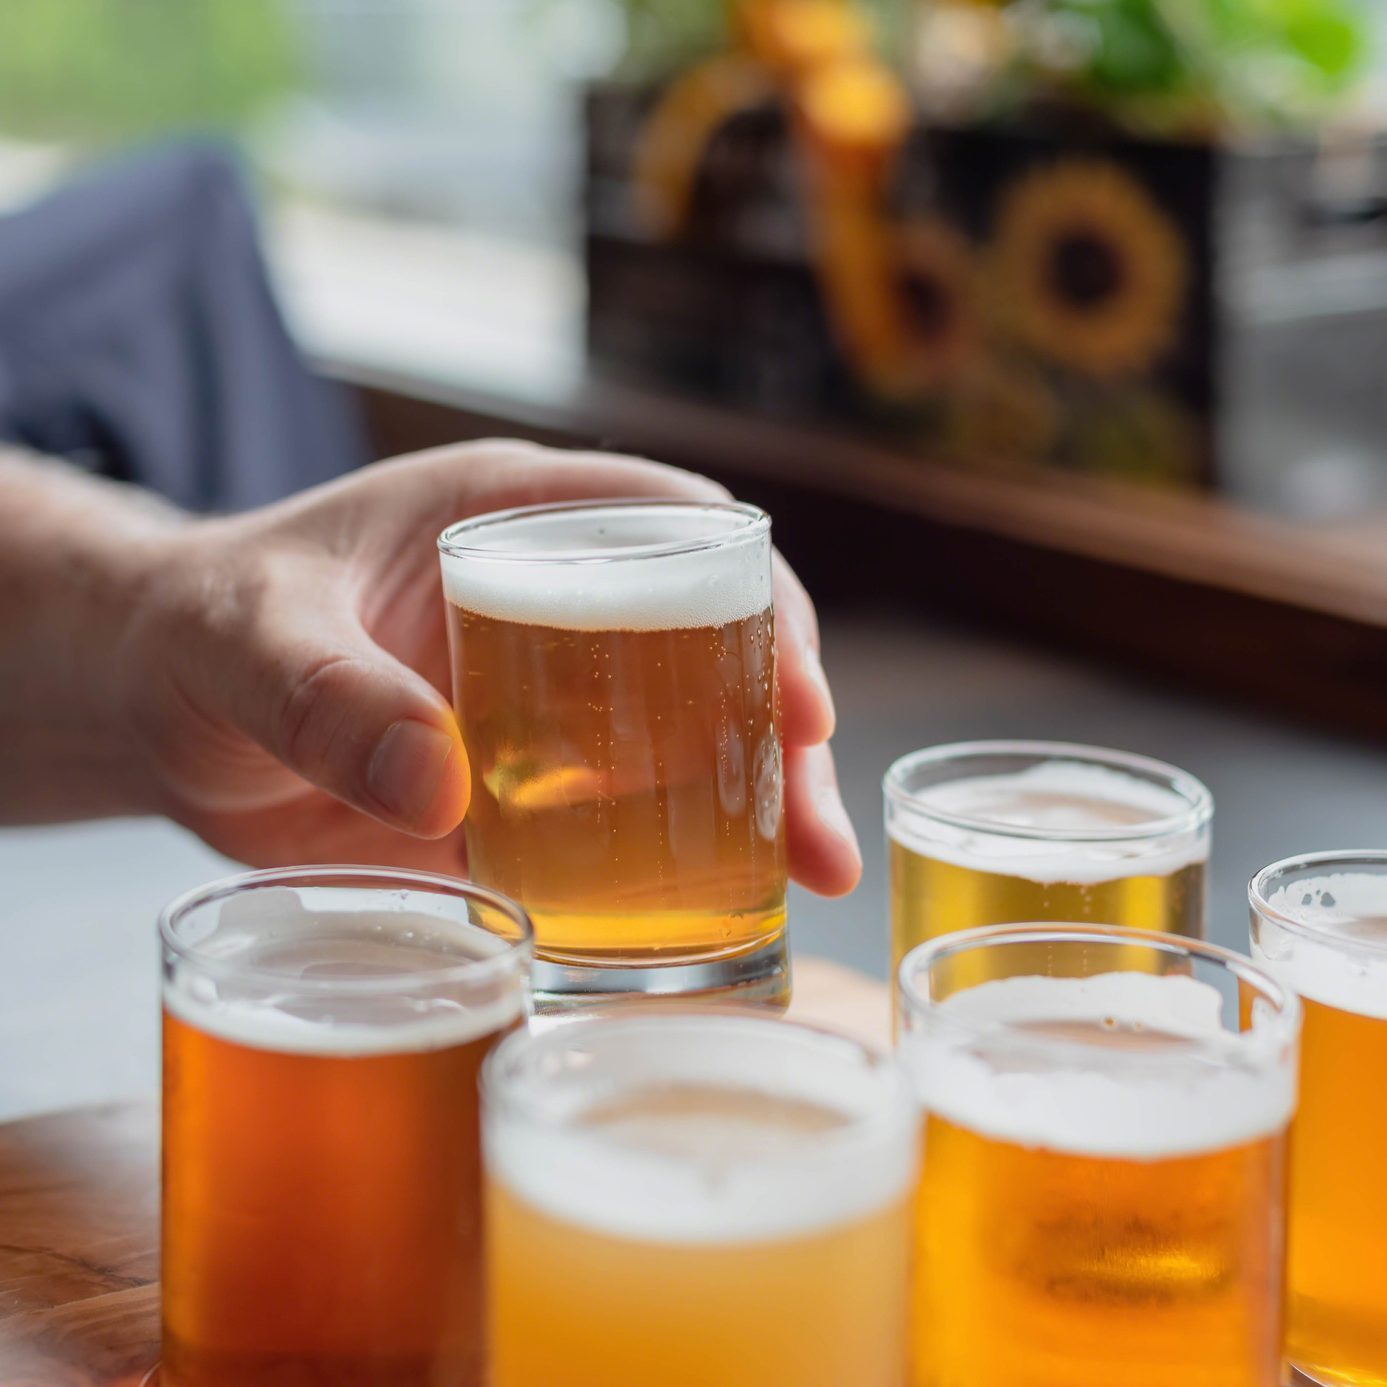 We Tried 10 These Are the Best Light Beer Brands You Can Buy